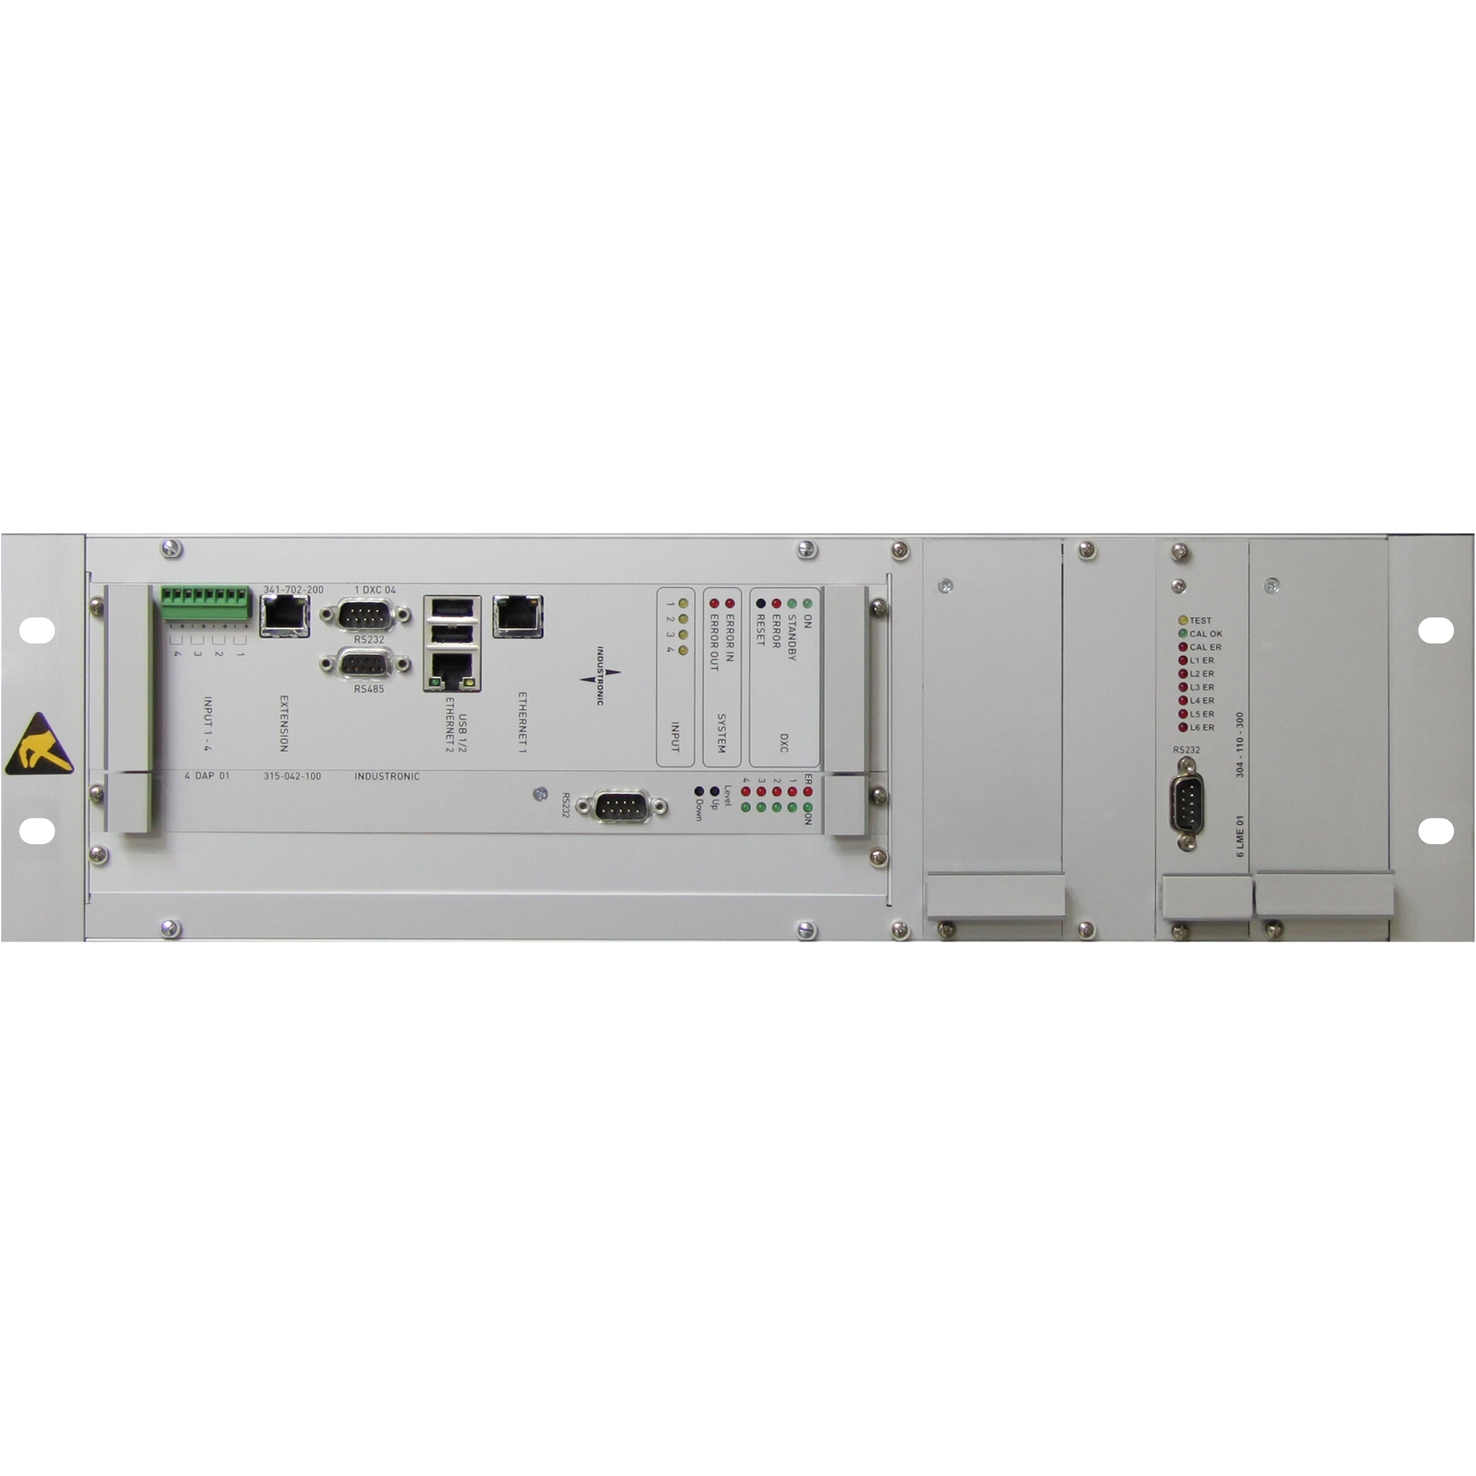 The NFPA 72 compliant netCIS Compact INDUSTRONIC System by INDUSTRONIC synergizes customization and flexibility with quality and speed of delivery in a full prepared 3 RU sub-rack for 19" installation.